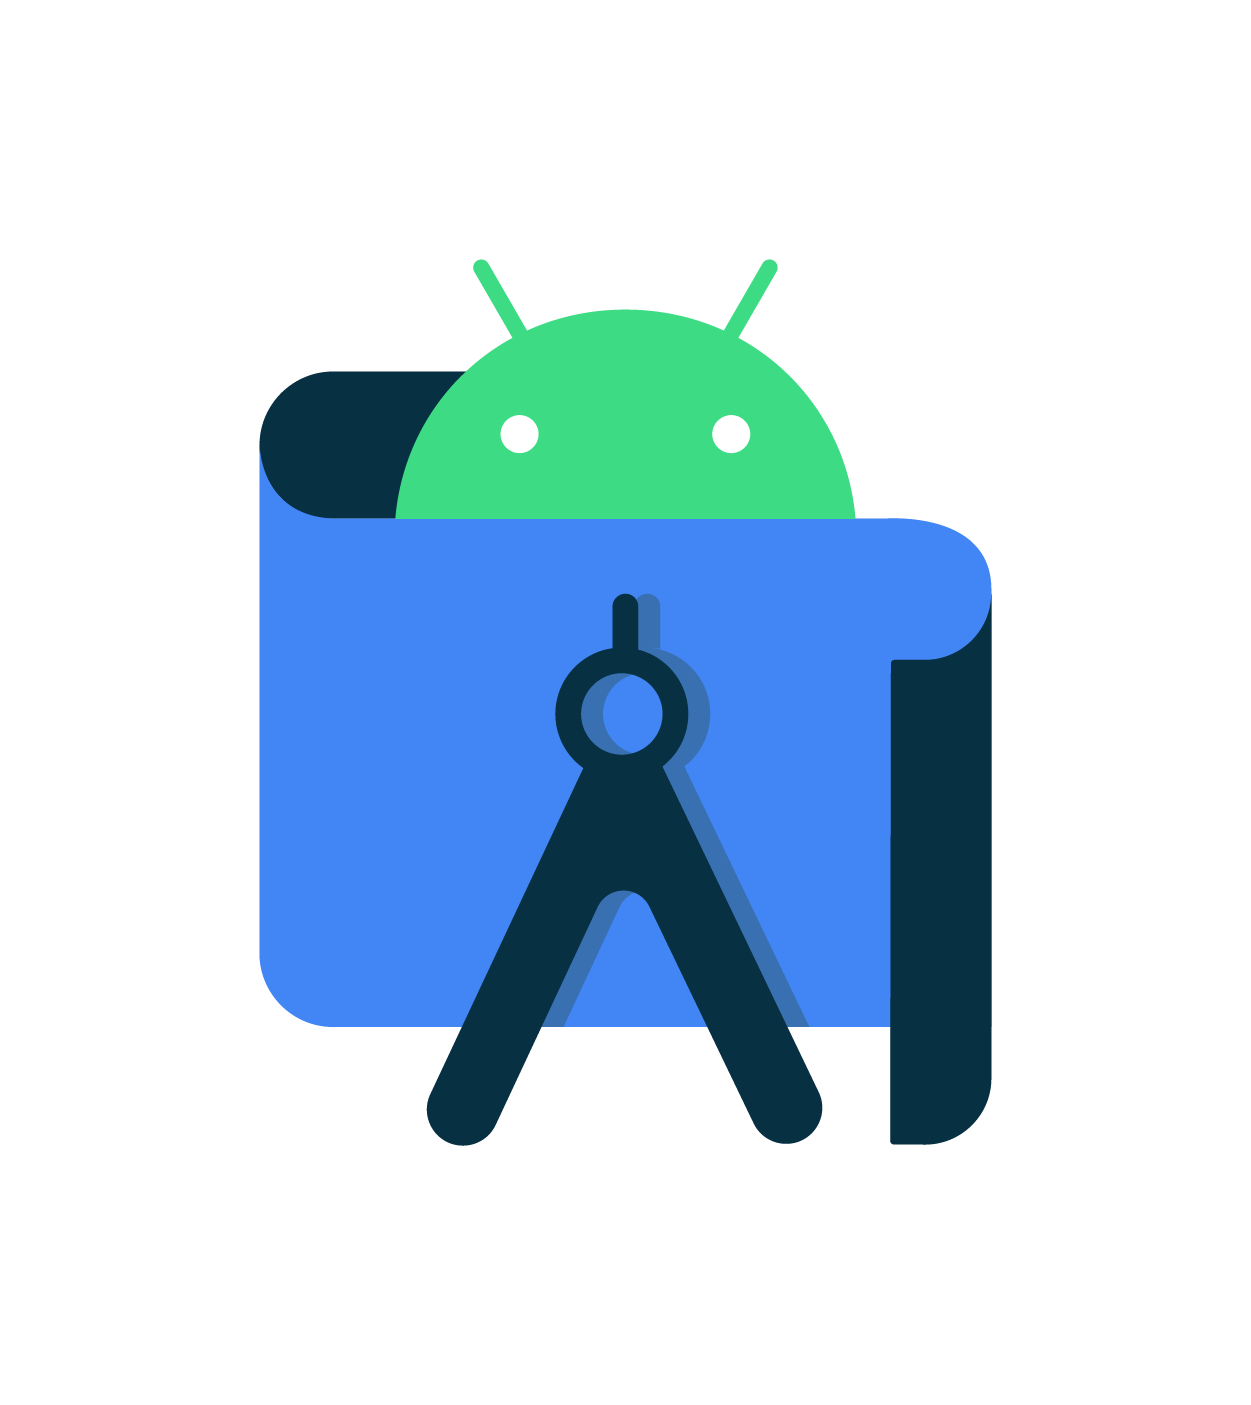 Android Studio 2022.3.1.18 for ios download free